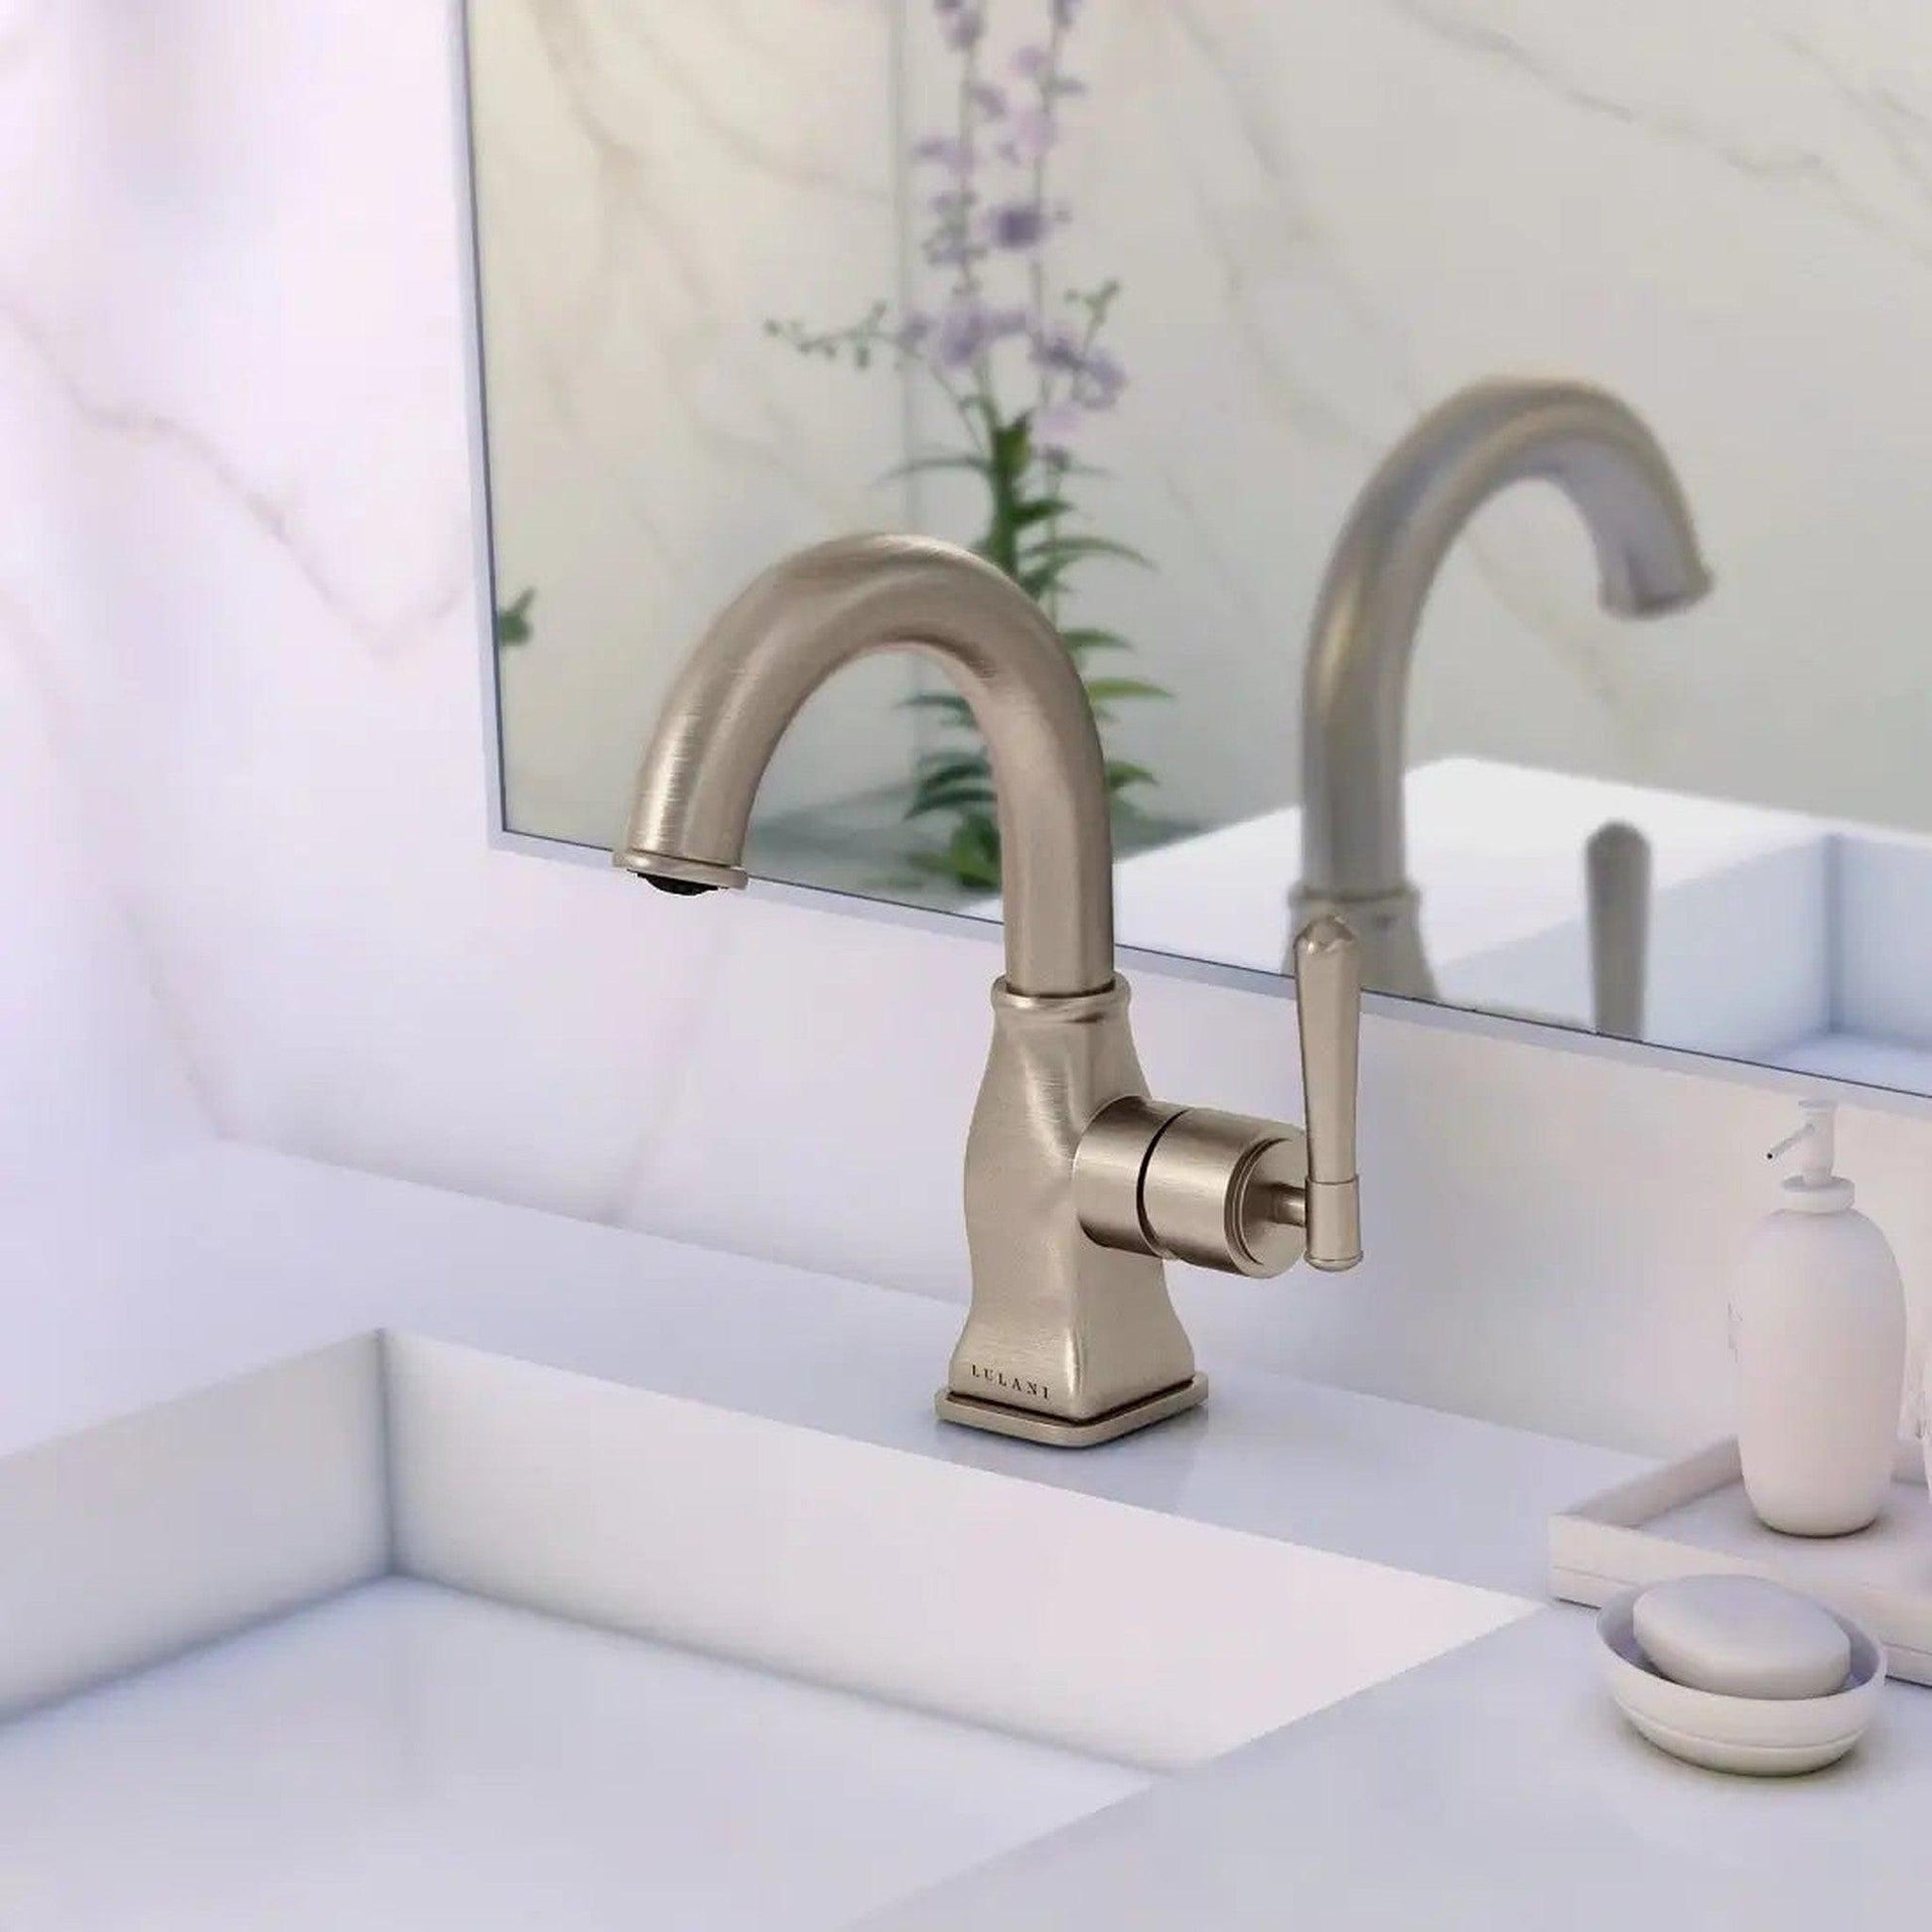 Lulani Aurora Brushed Nickel 1.2 GPM Single Hole 1-Handle Brass Faucet With Drain Assembly